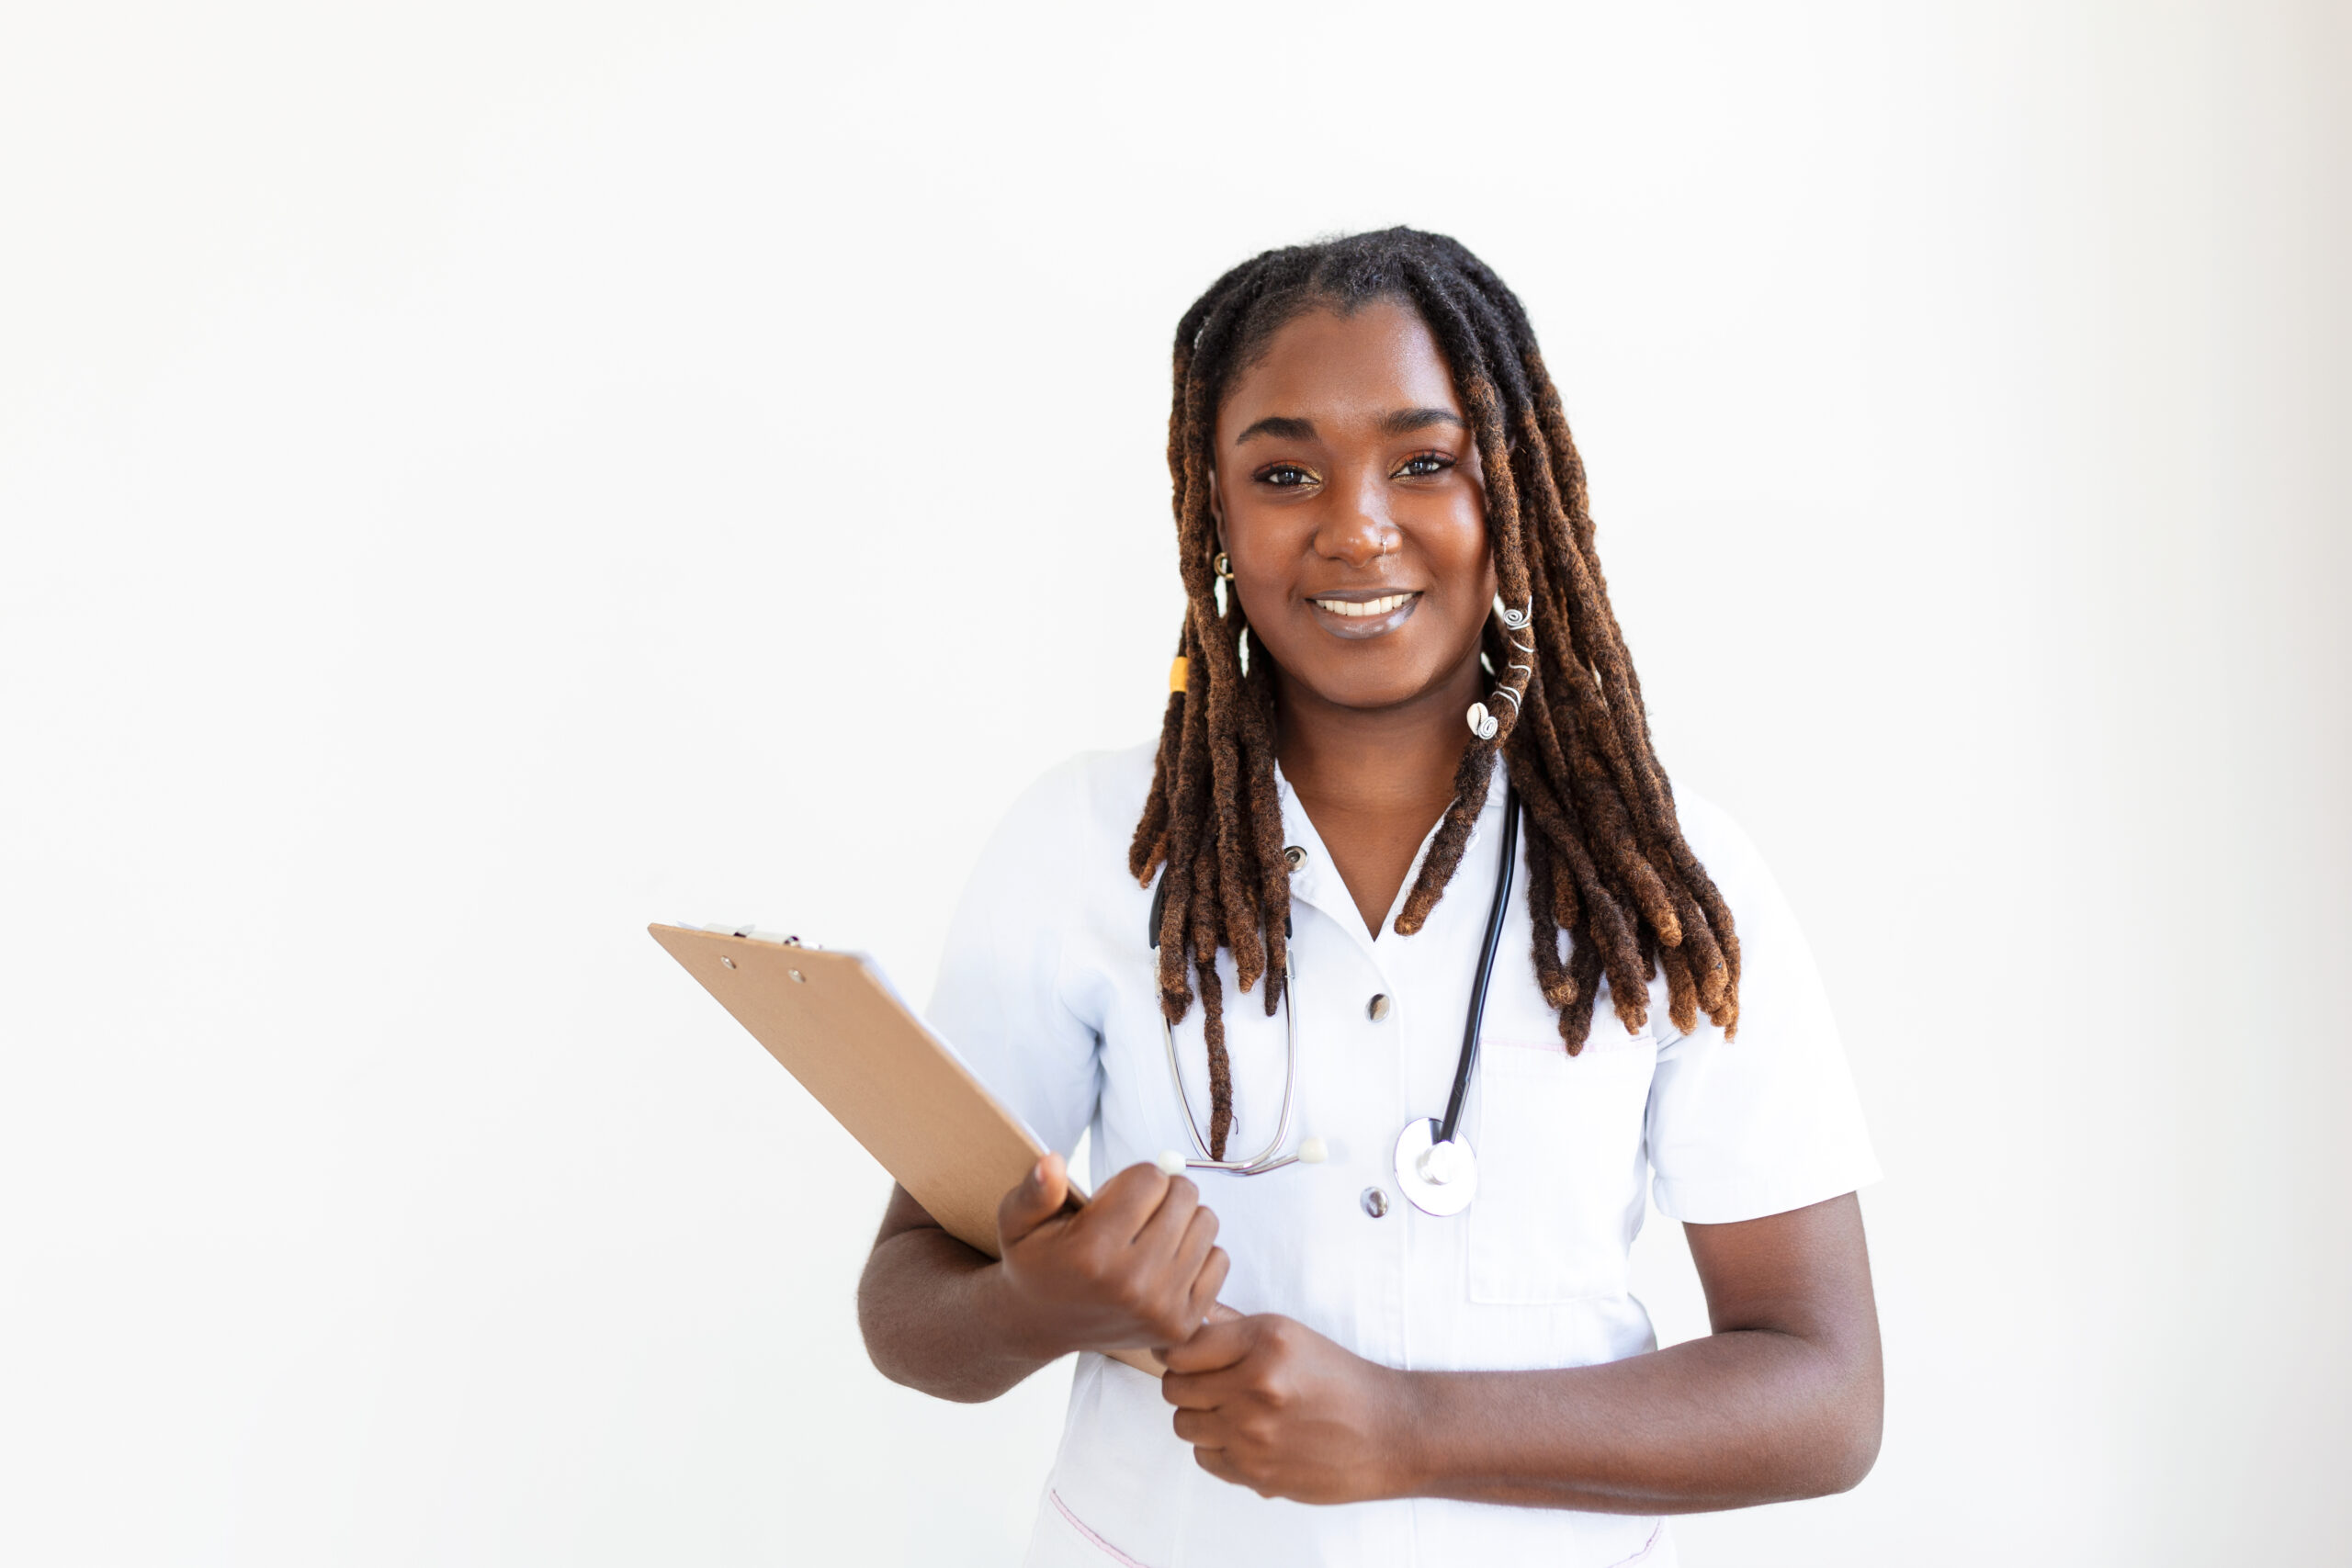 emale nurse or doctor smiles while staring out window in hospital hallway and holding clipboard with patient file. African American female pediatric nurse in office. Portrait Of Female Nurse Standing In Hospital Corridor